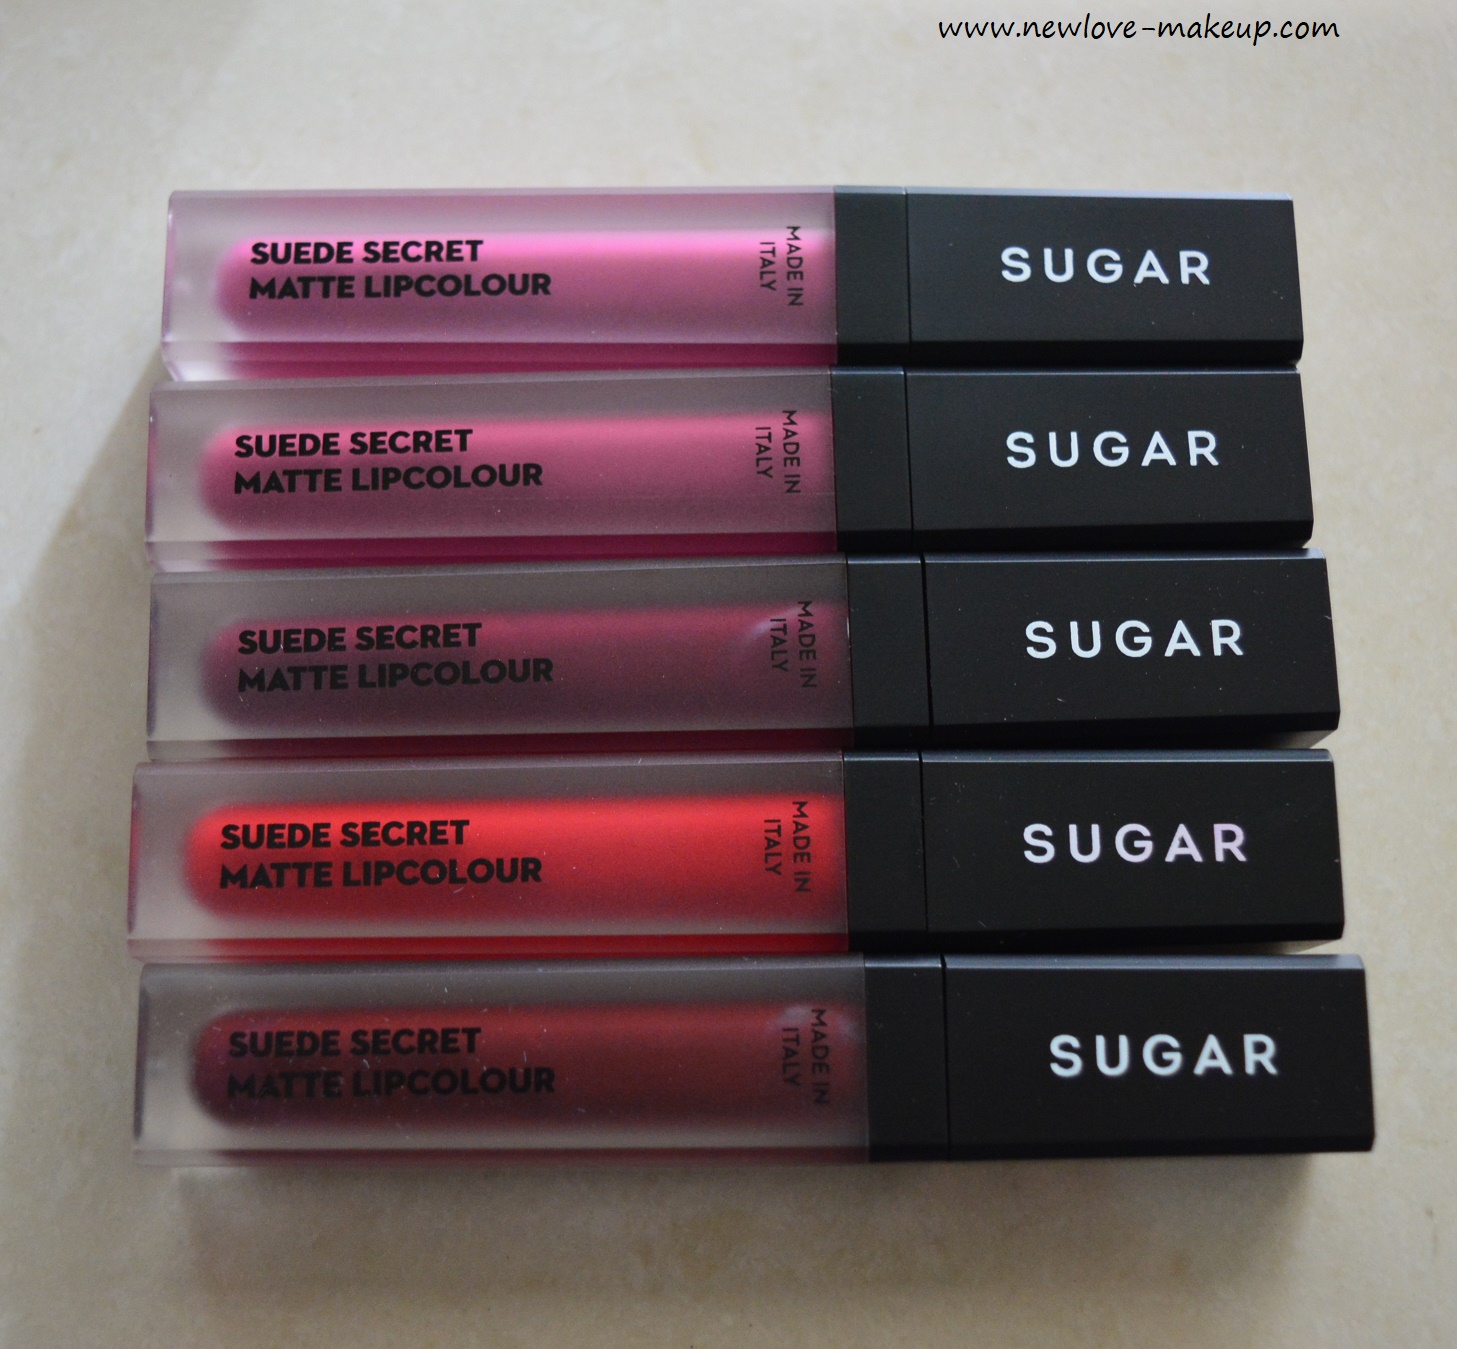 Swatches - 10 New Shades 11 to 20 of Sugar Suede Secret Lip Colours